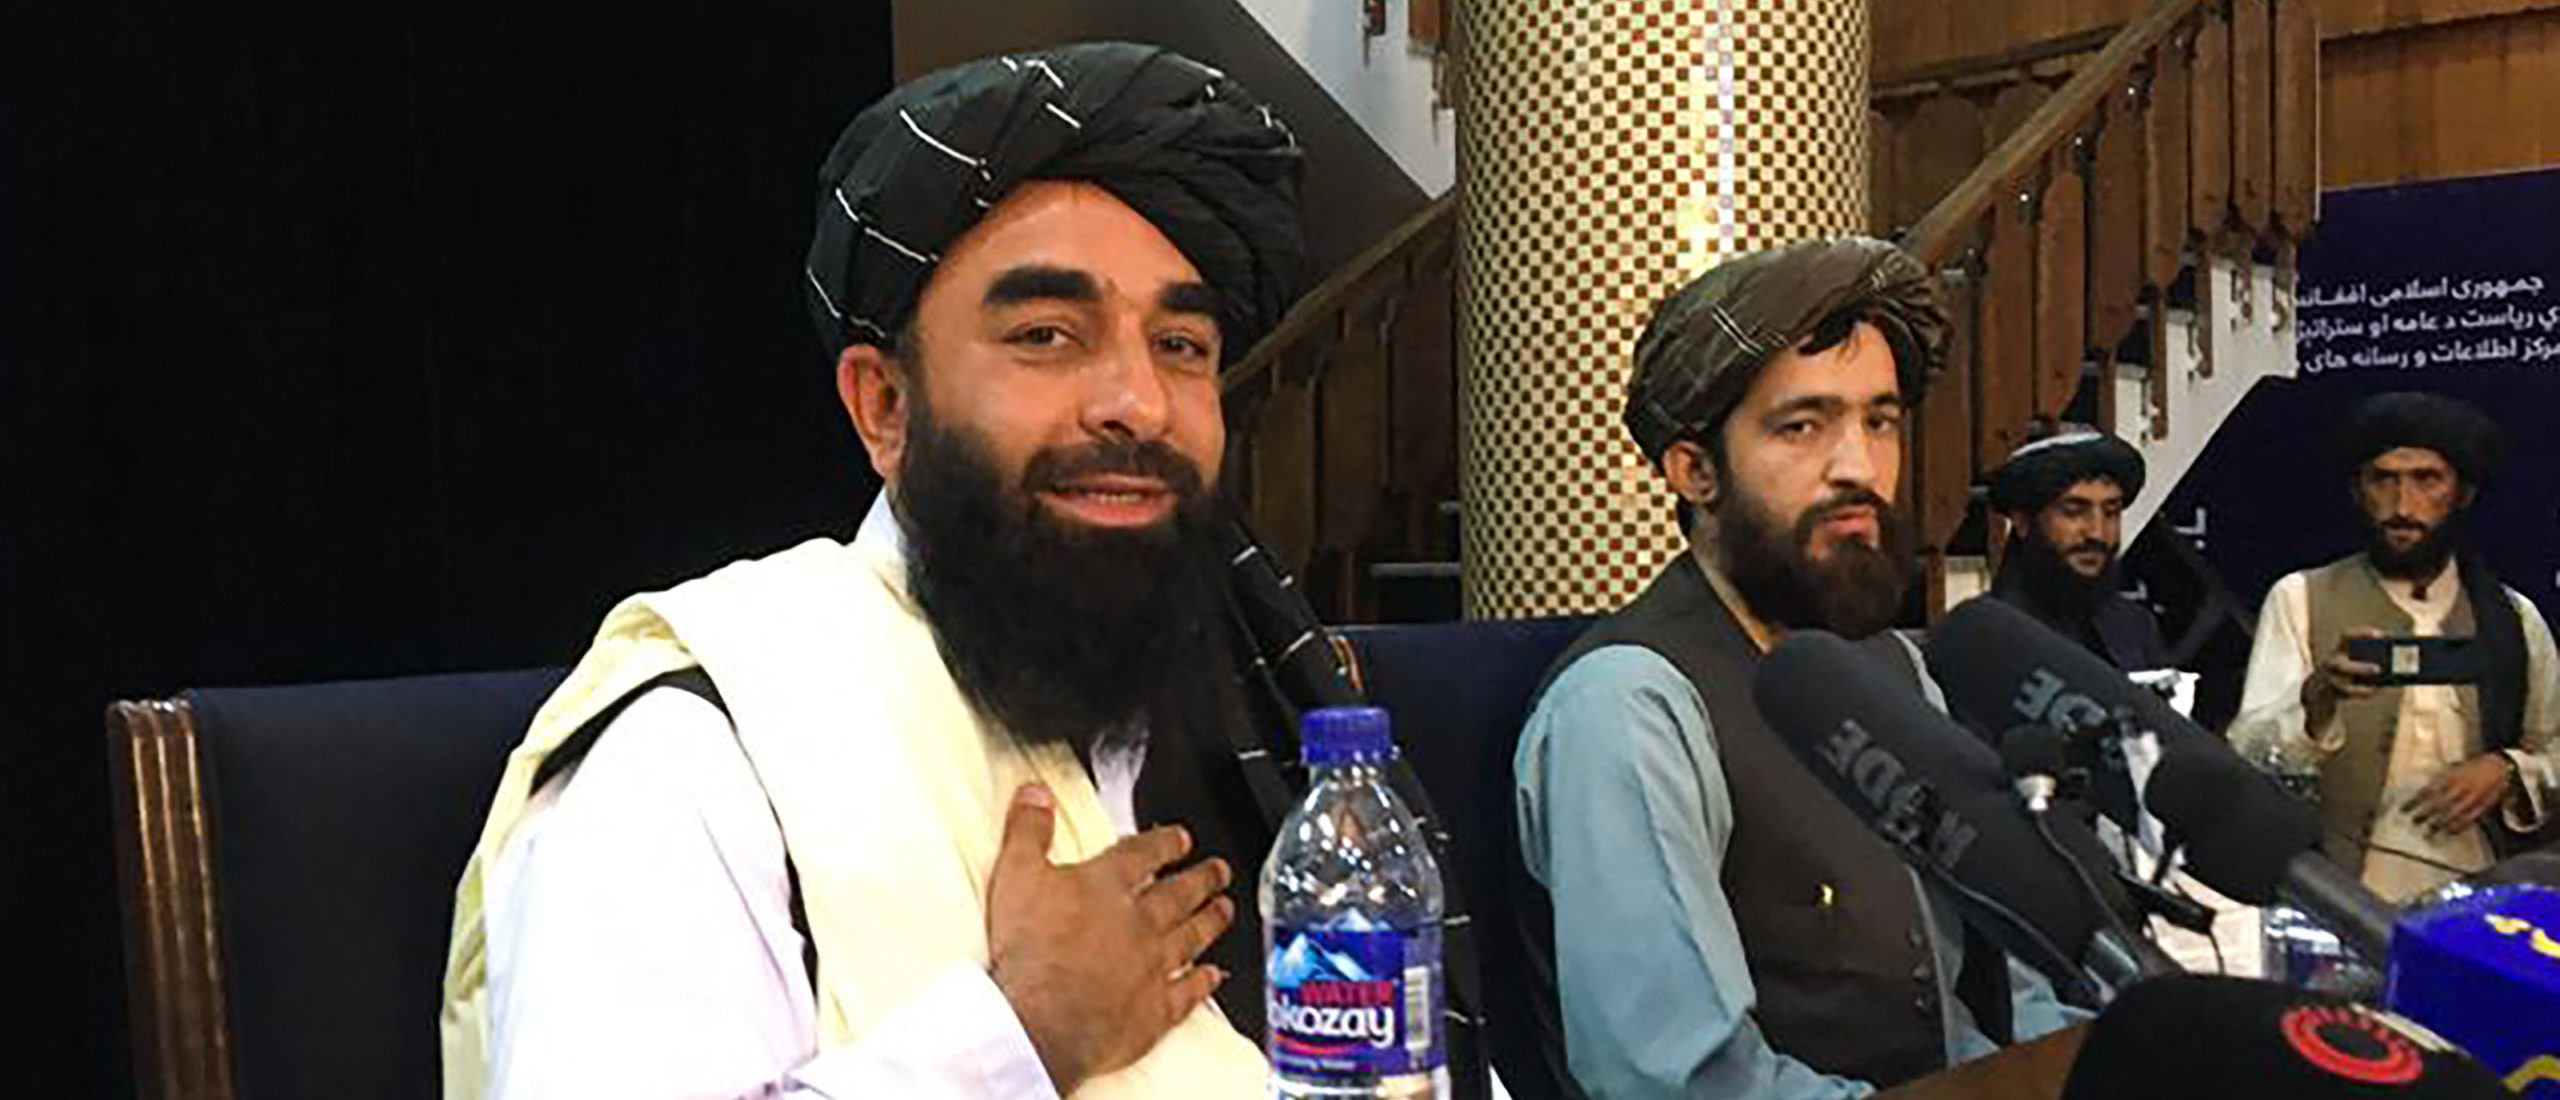 Taliban spokesperson Zabihullah Mujahid (L) attends the first press conference in Kabul on August 17, 2021, following their stunning takeover of Afghanistan. (Photo by HOSHANG HASHIMI/AFP via Getty Images)